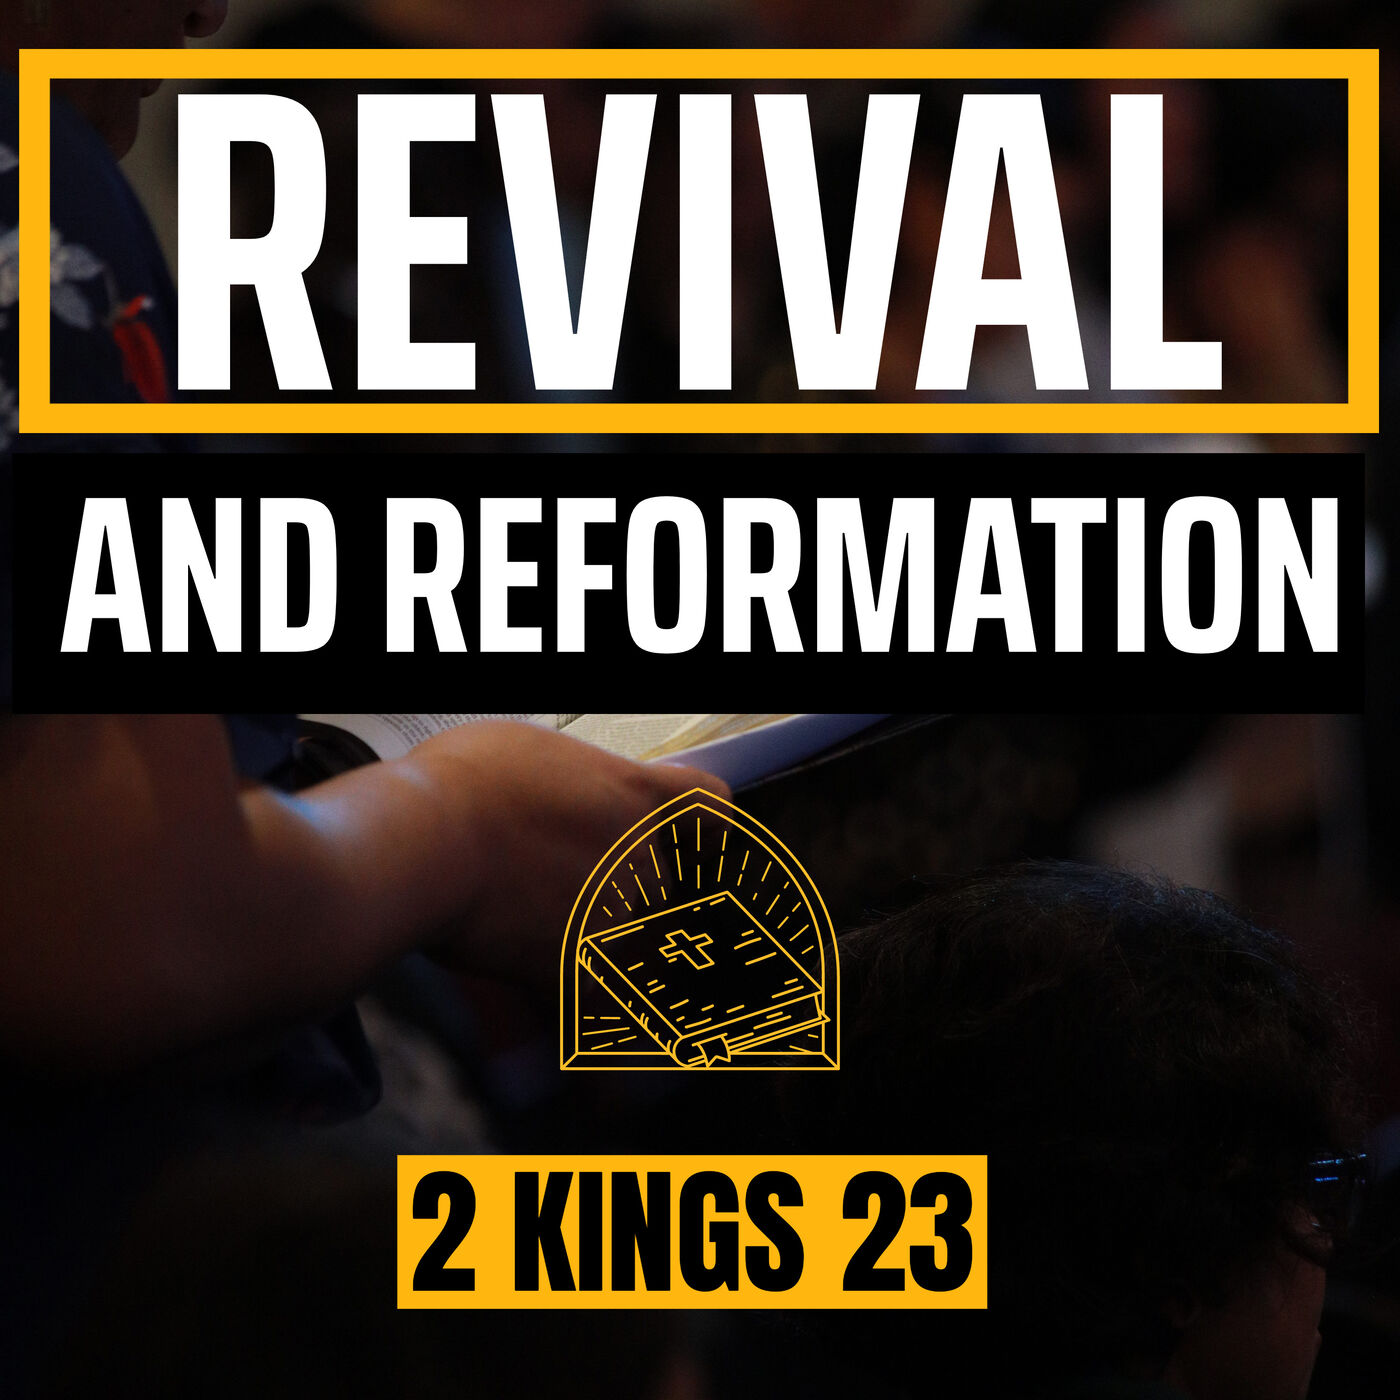 Revival And Reformation: What It Looks Like